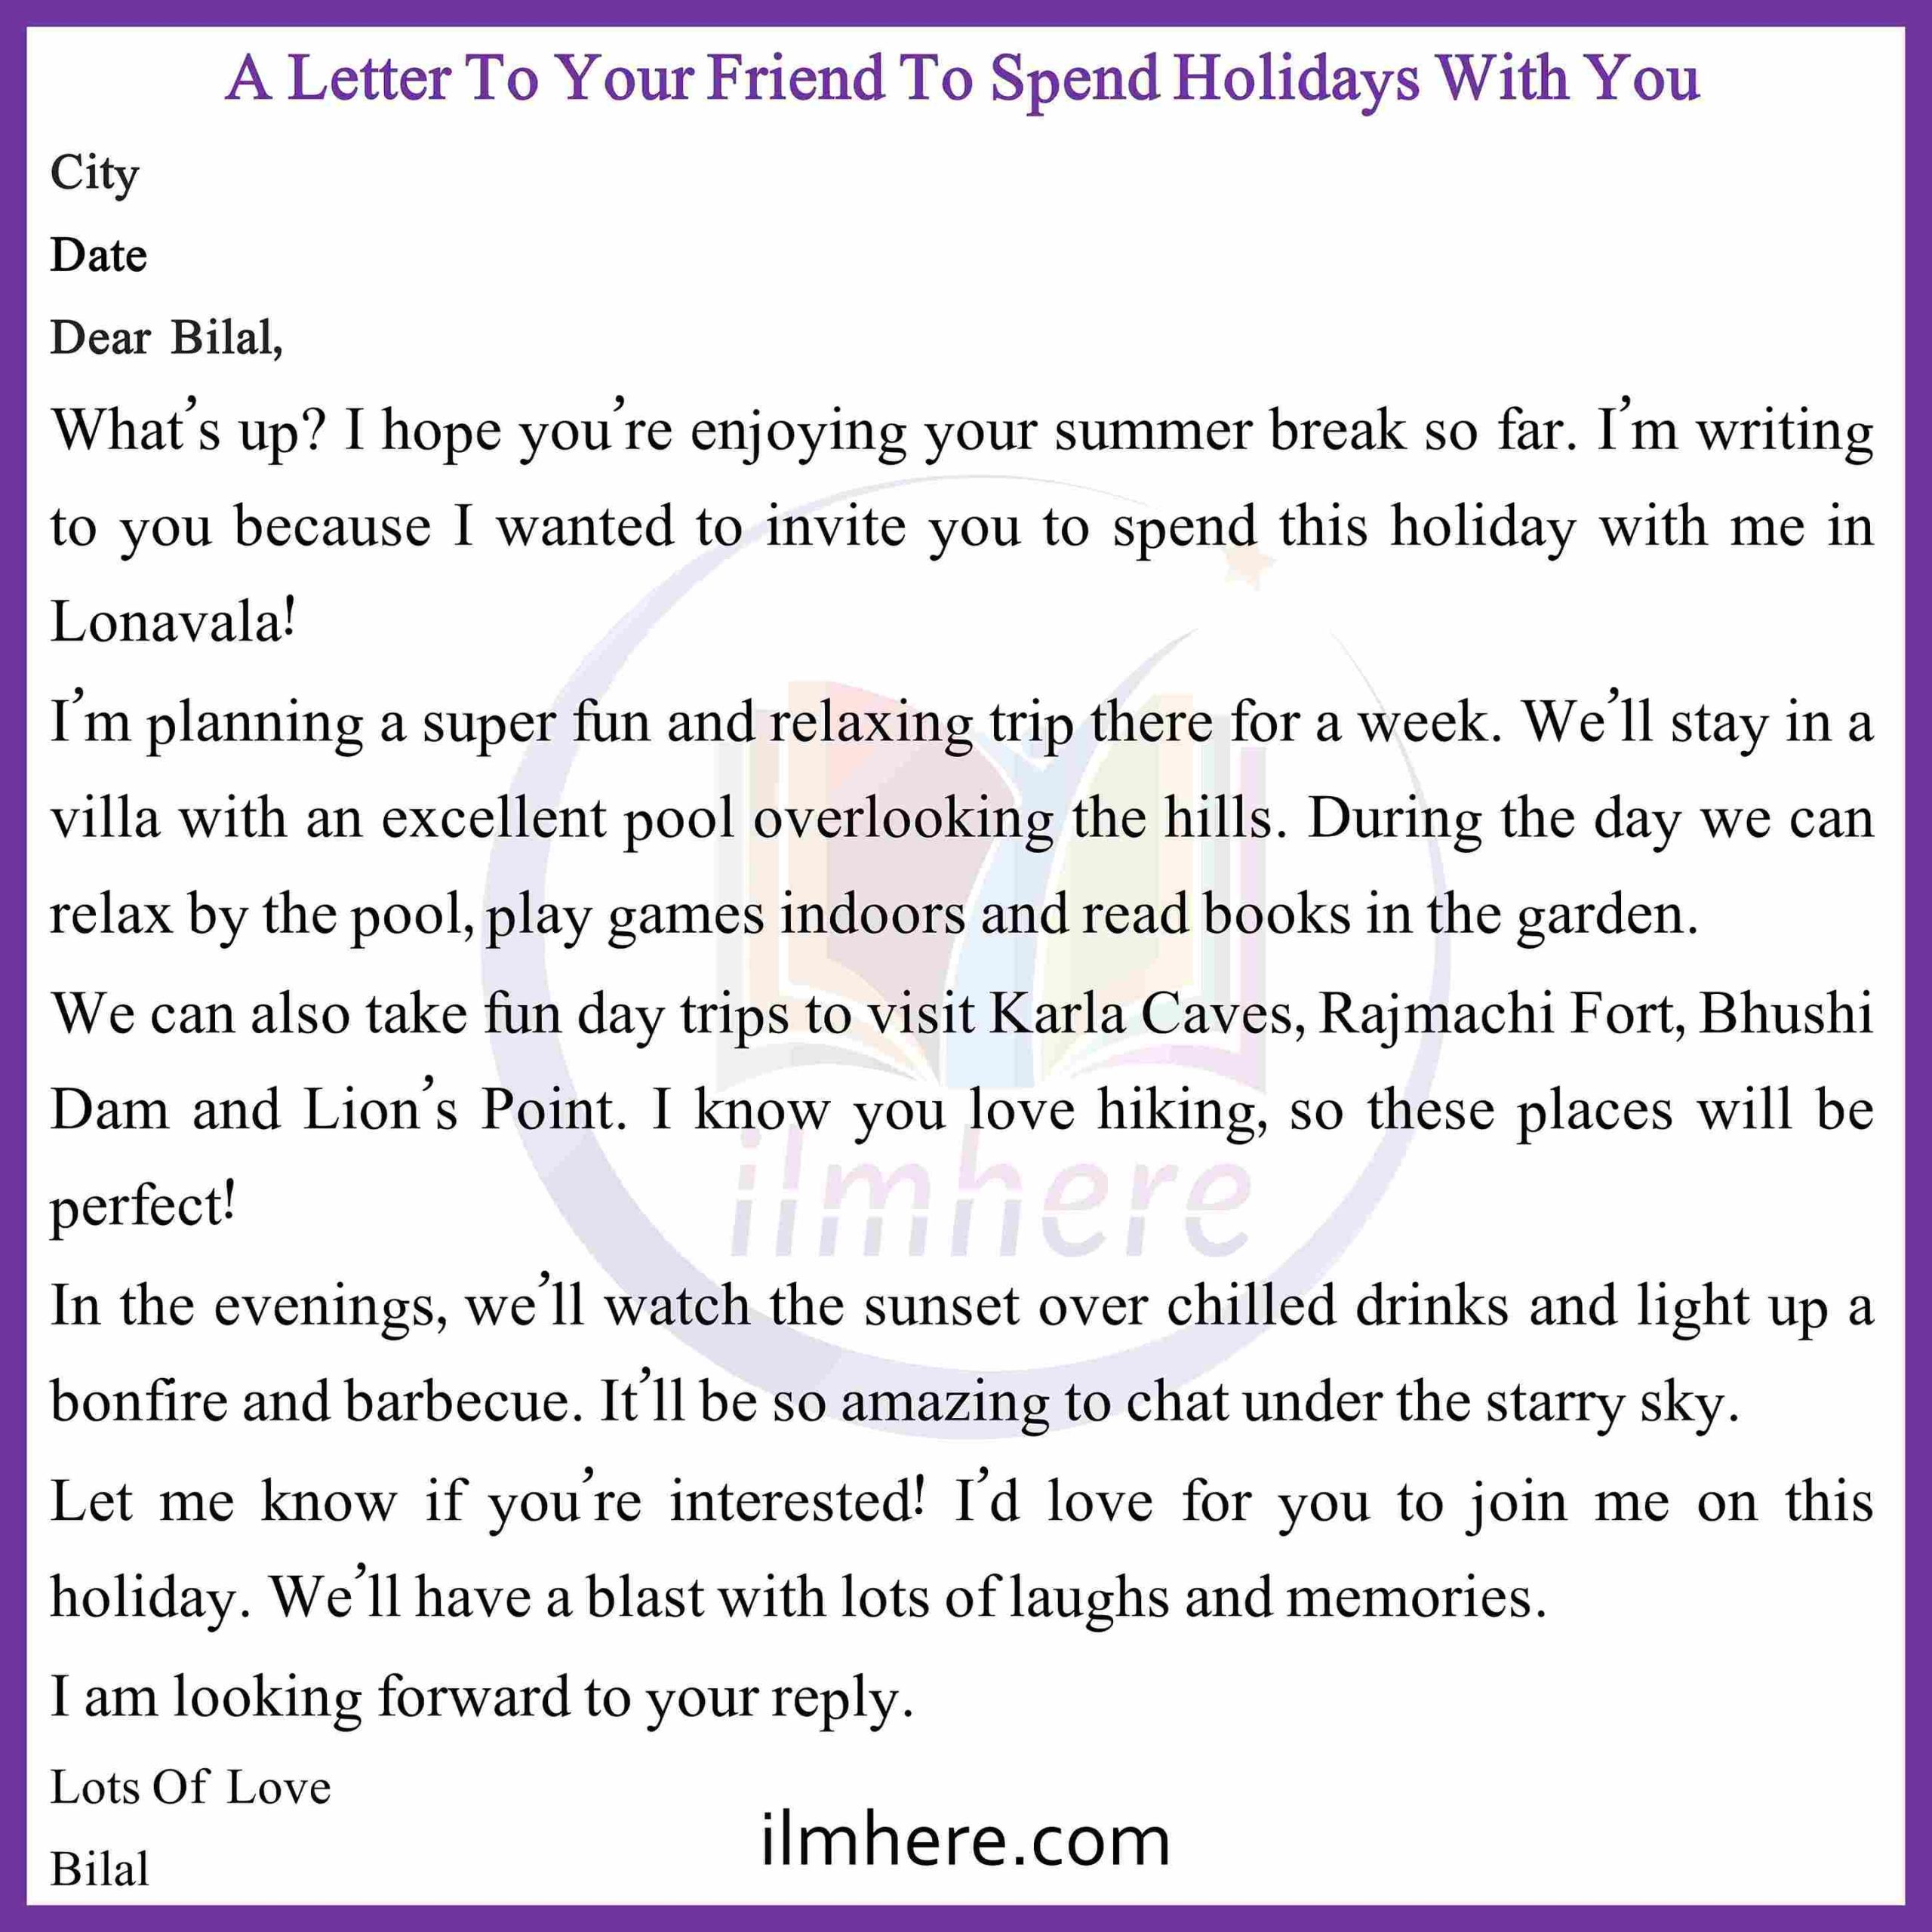 How to Write a Letter To Your Friend To Spend Holidays With You